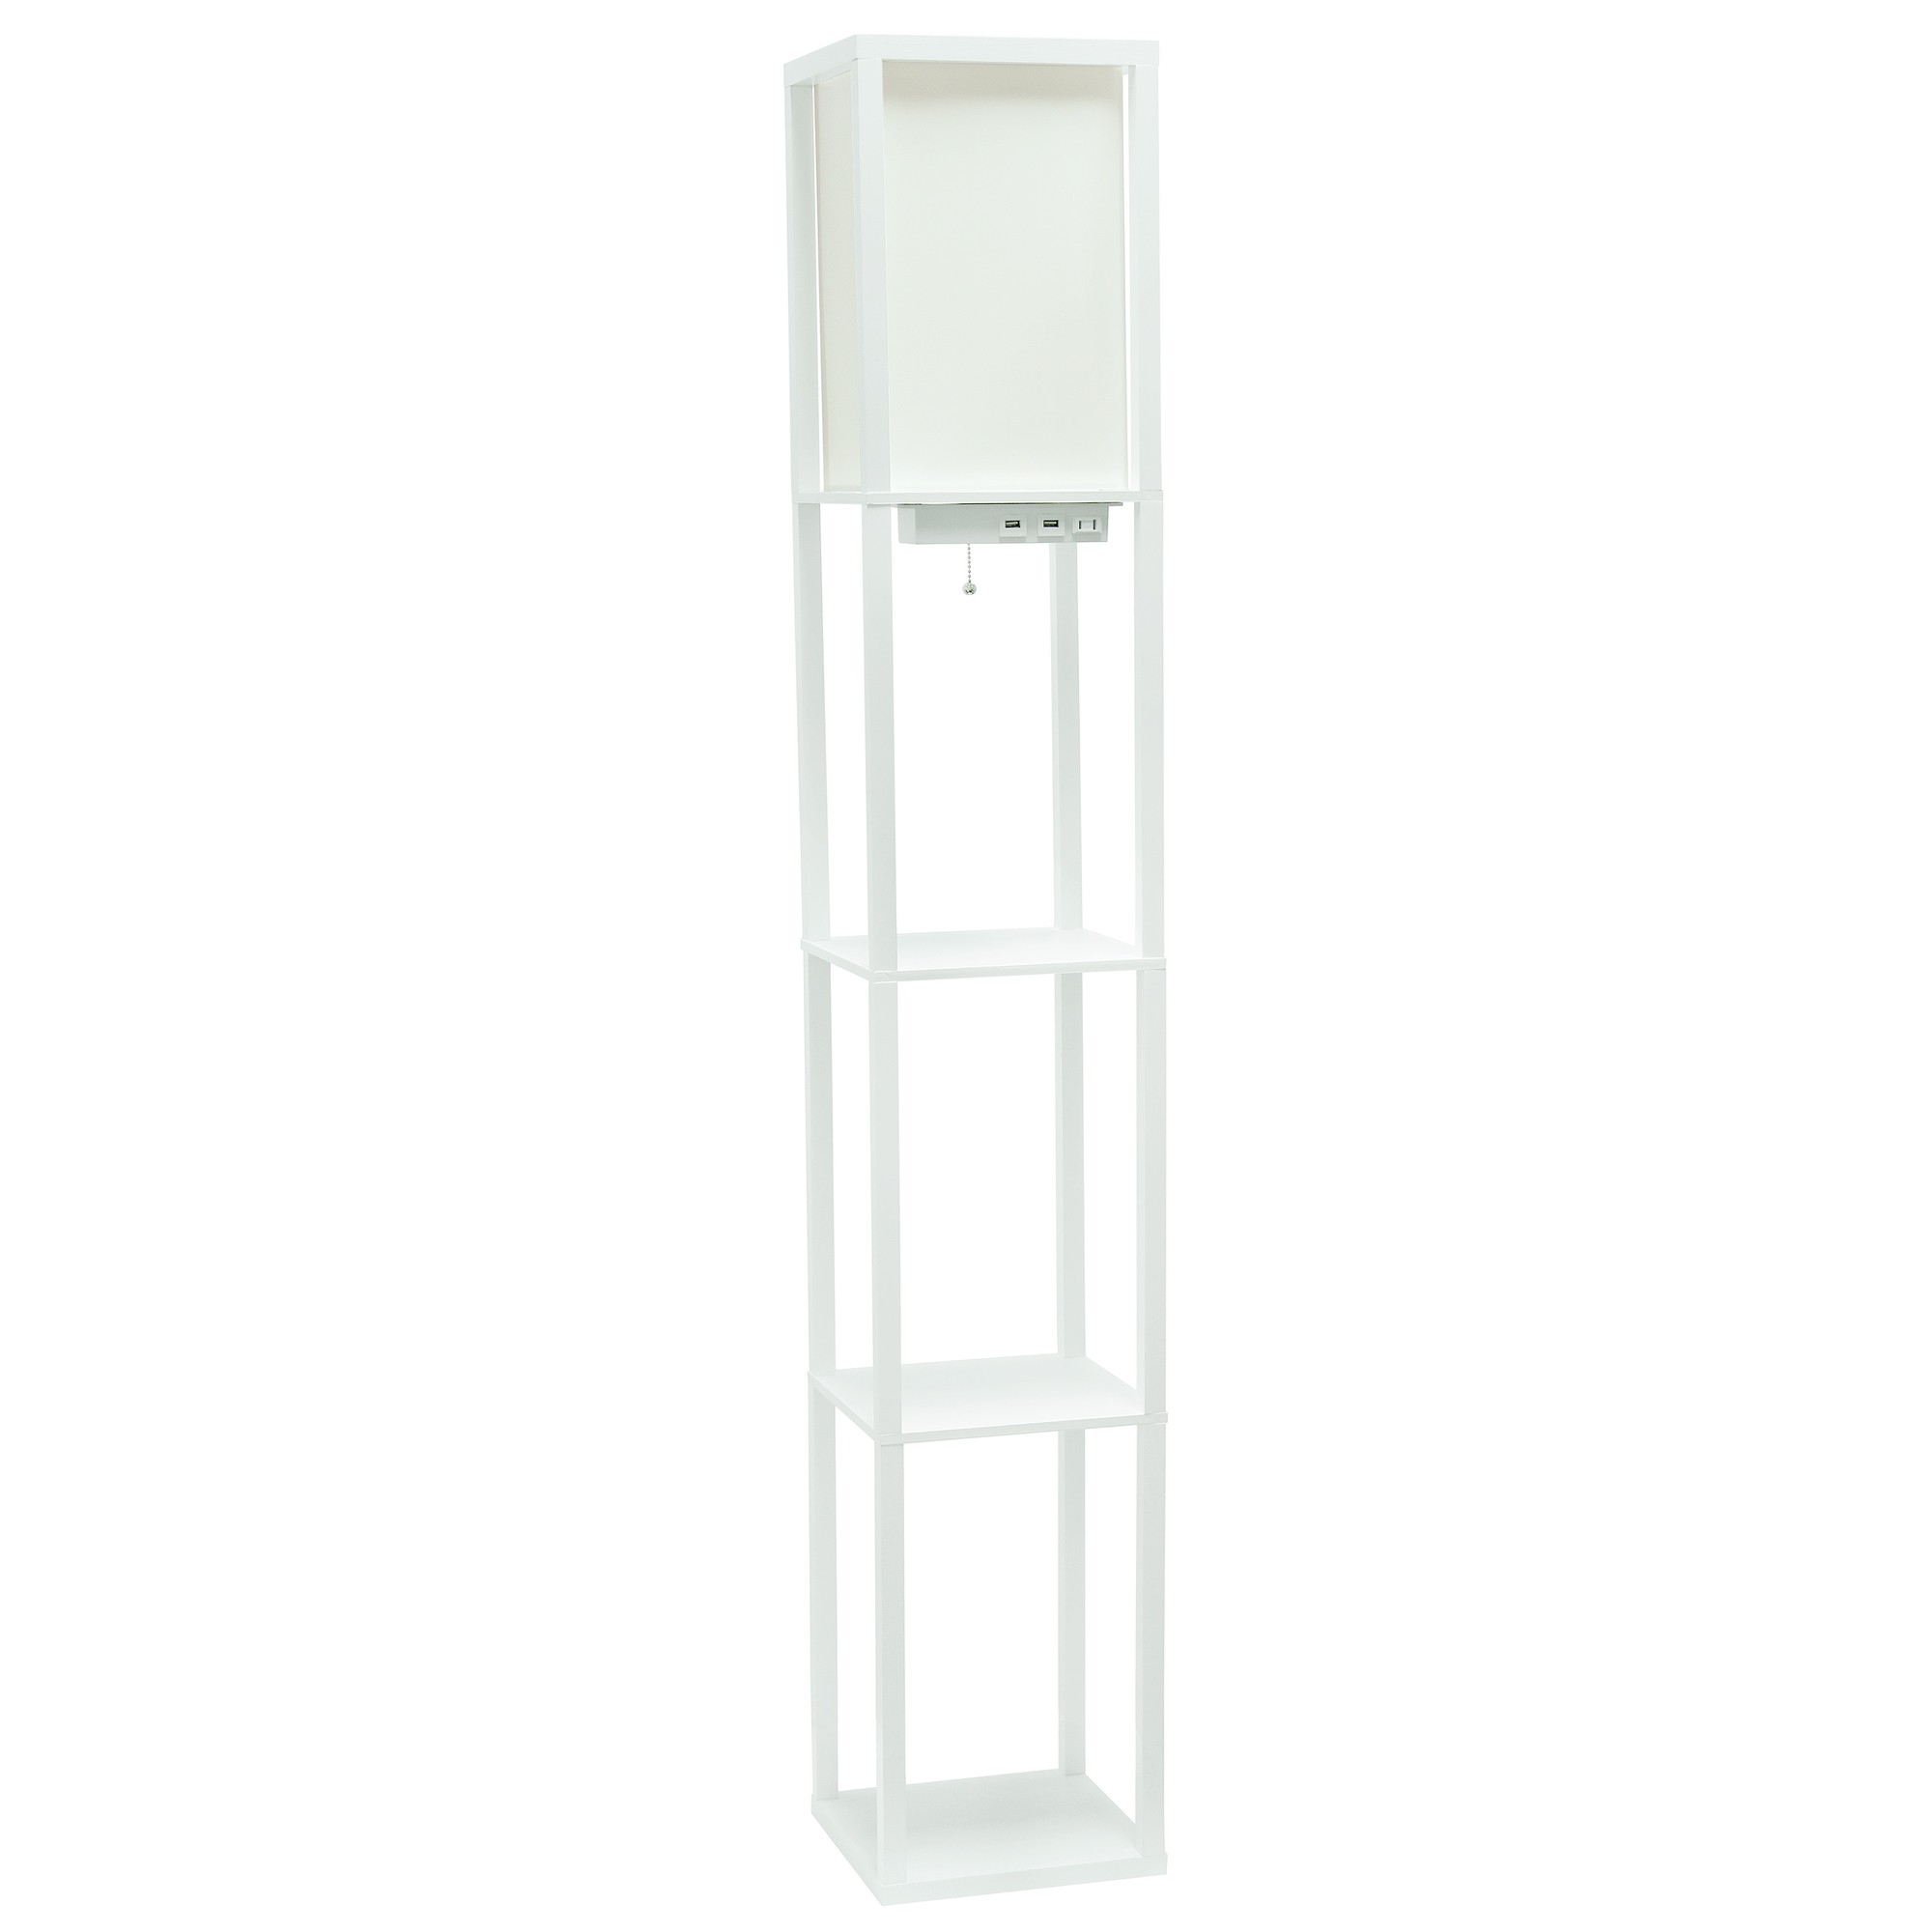 Simple Designs Floor Lamp Etagere Organizer Storage Shelf with 2 USB Charging Ports, 1 Charging Outlet and Linen Shade, White